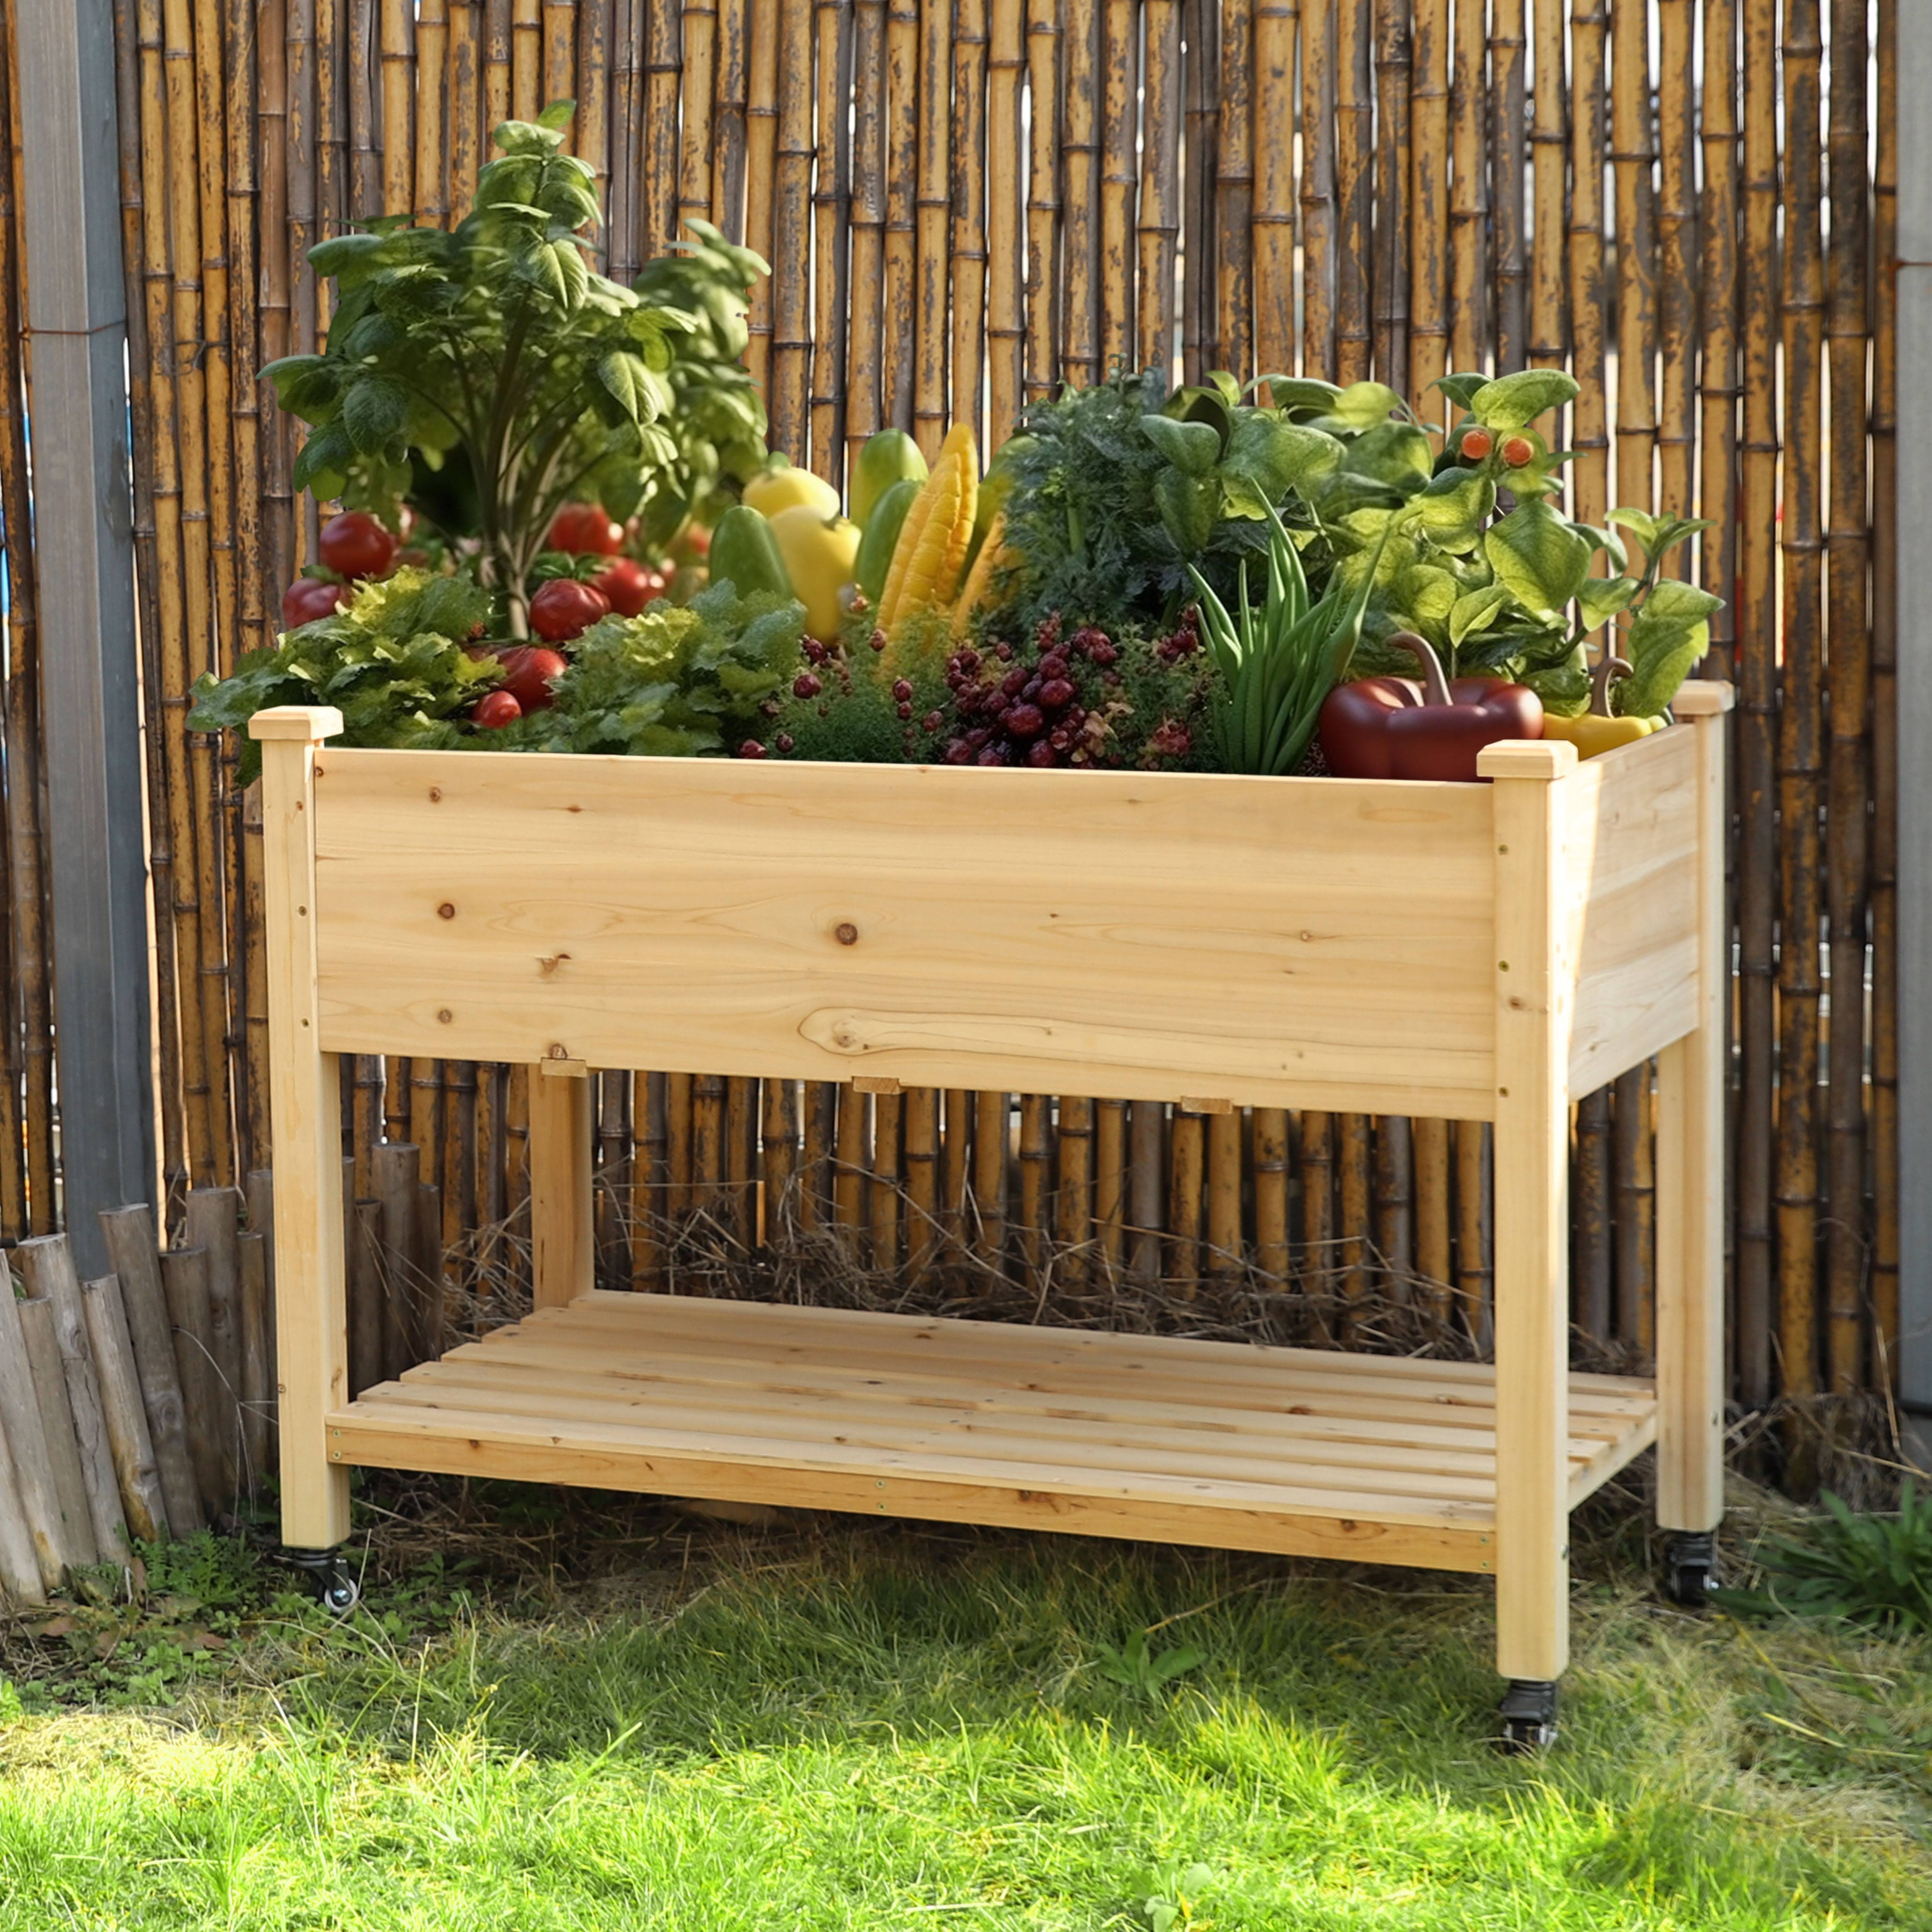 

Vegetable And Herb, Garden Bed, Elevated Wood Planter With Legs, 47x22x33 Inch, Raised Garden Boxes W/wheels And Storage Shelf For Outdoor